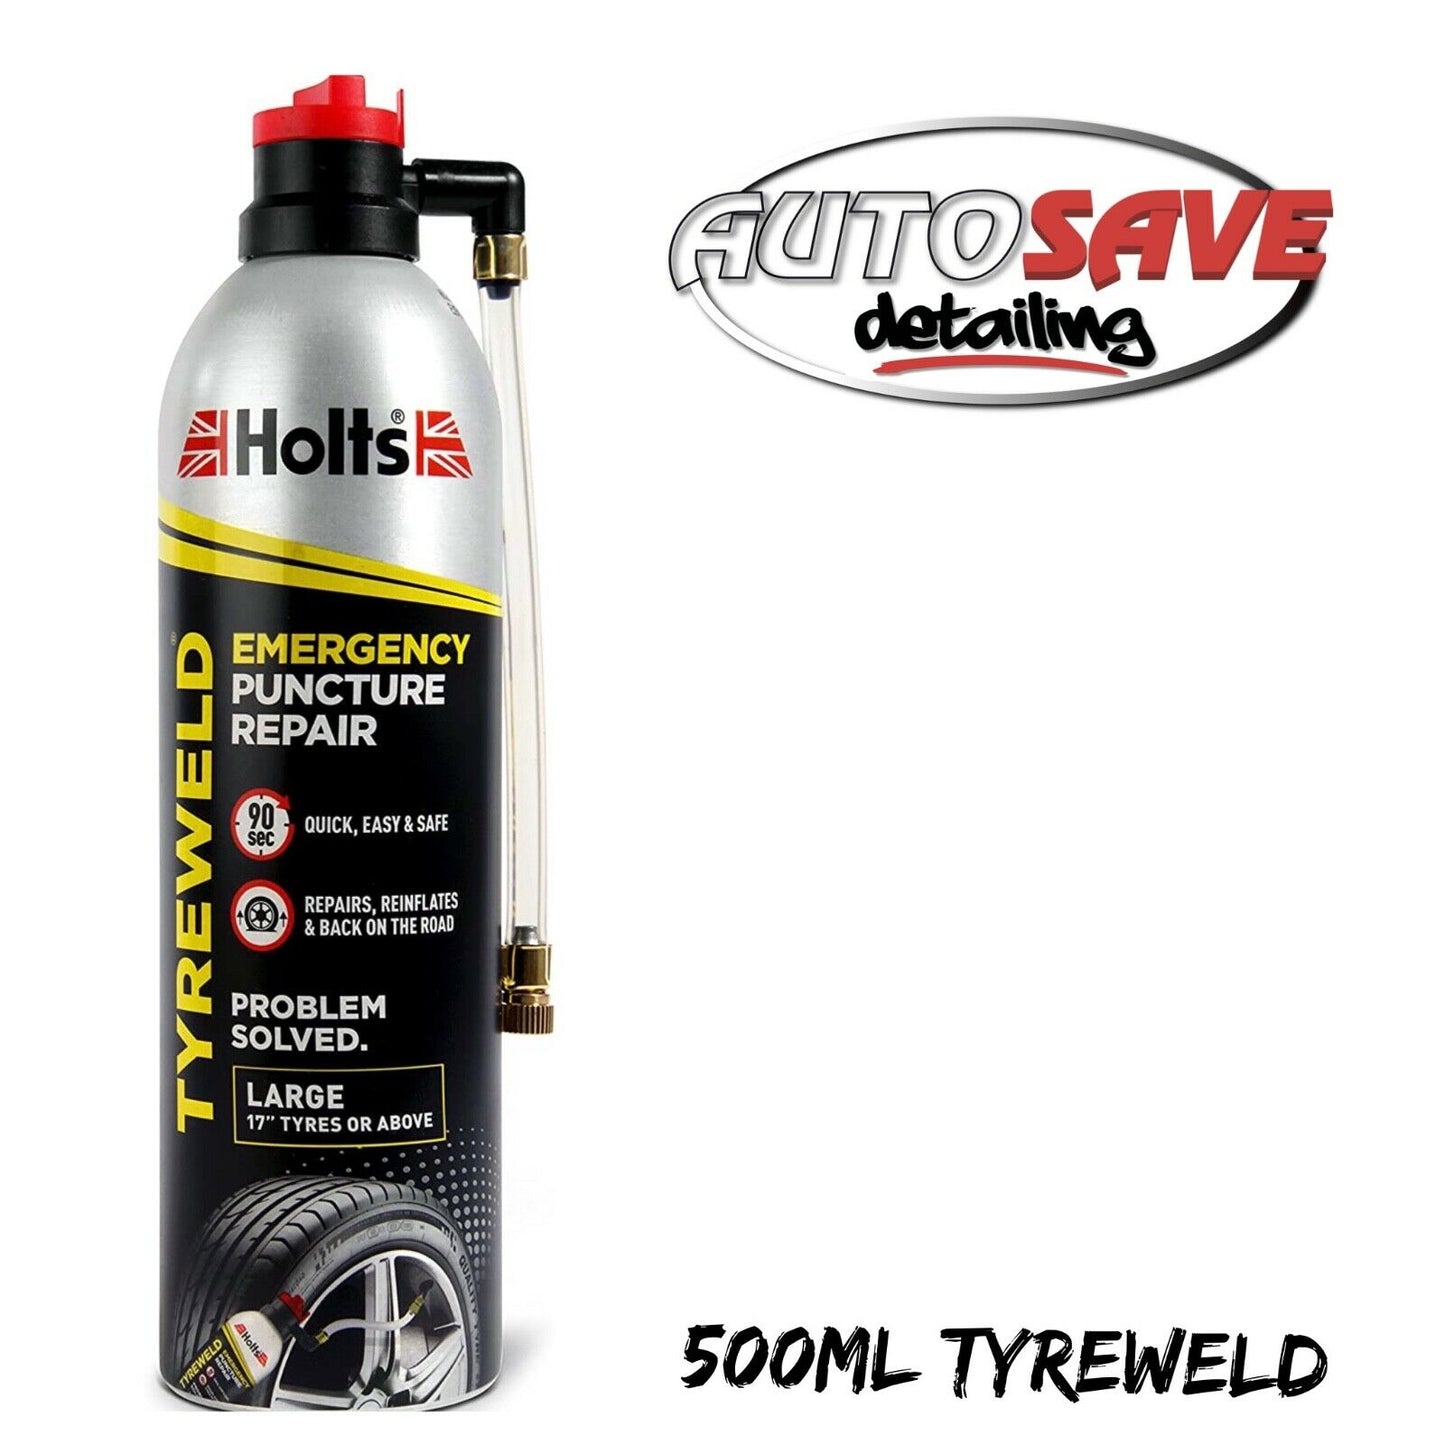 Holts Tyreweld 500ml - Puncture repair for car tyres 17" & above